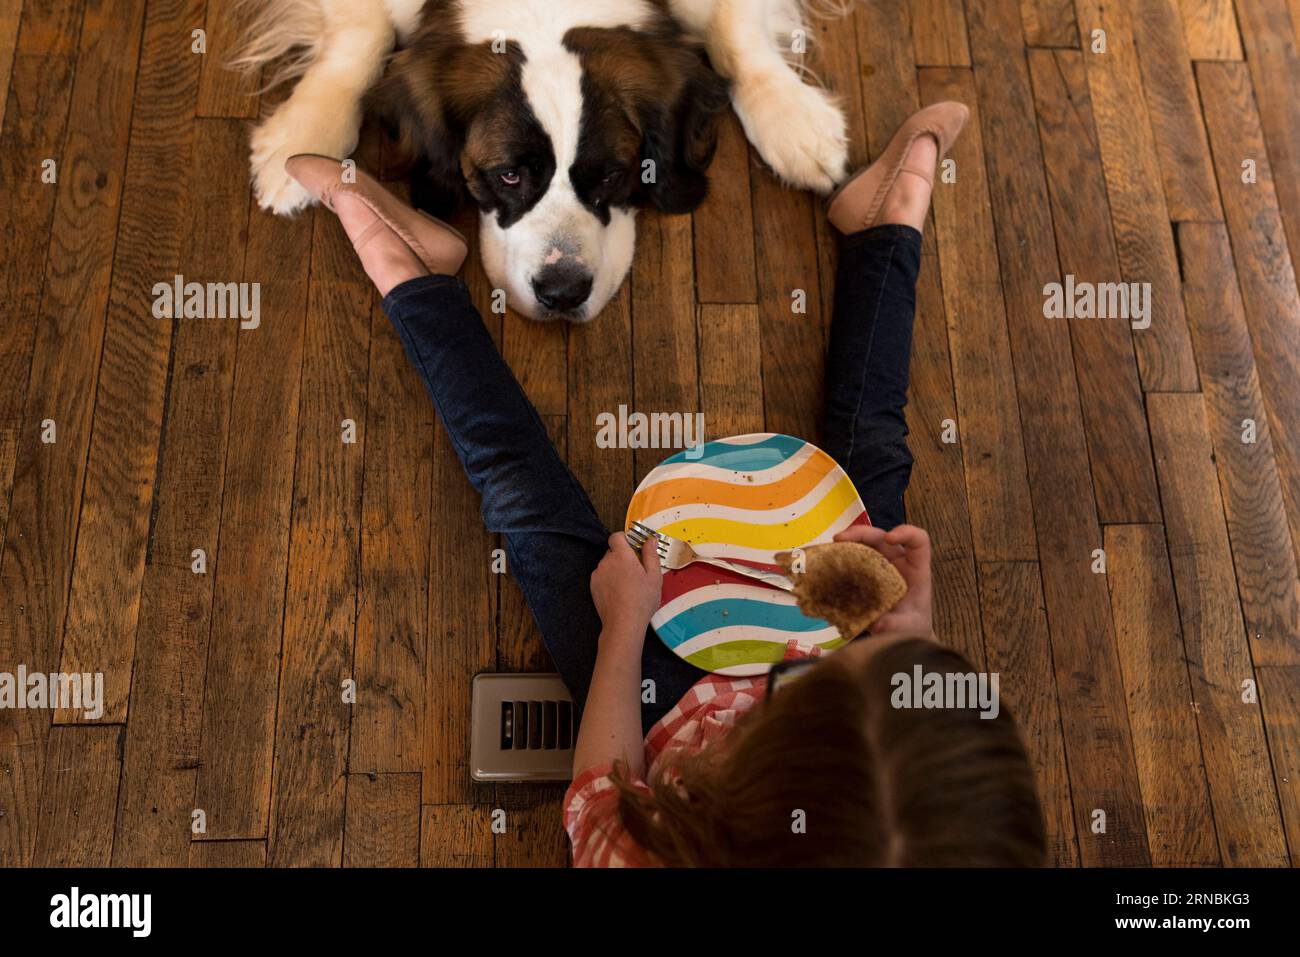 St. Bernard dog sits on floor with little girl begging for food Stock Photo